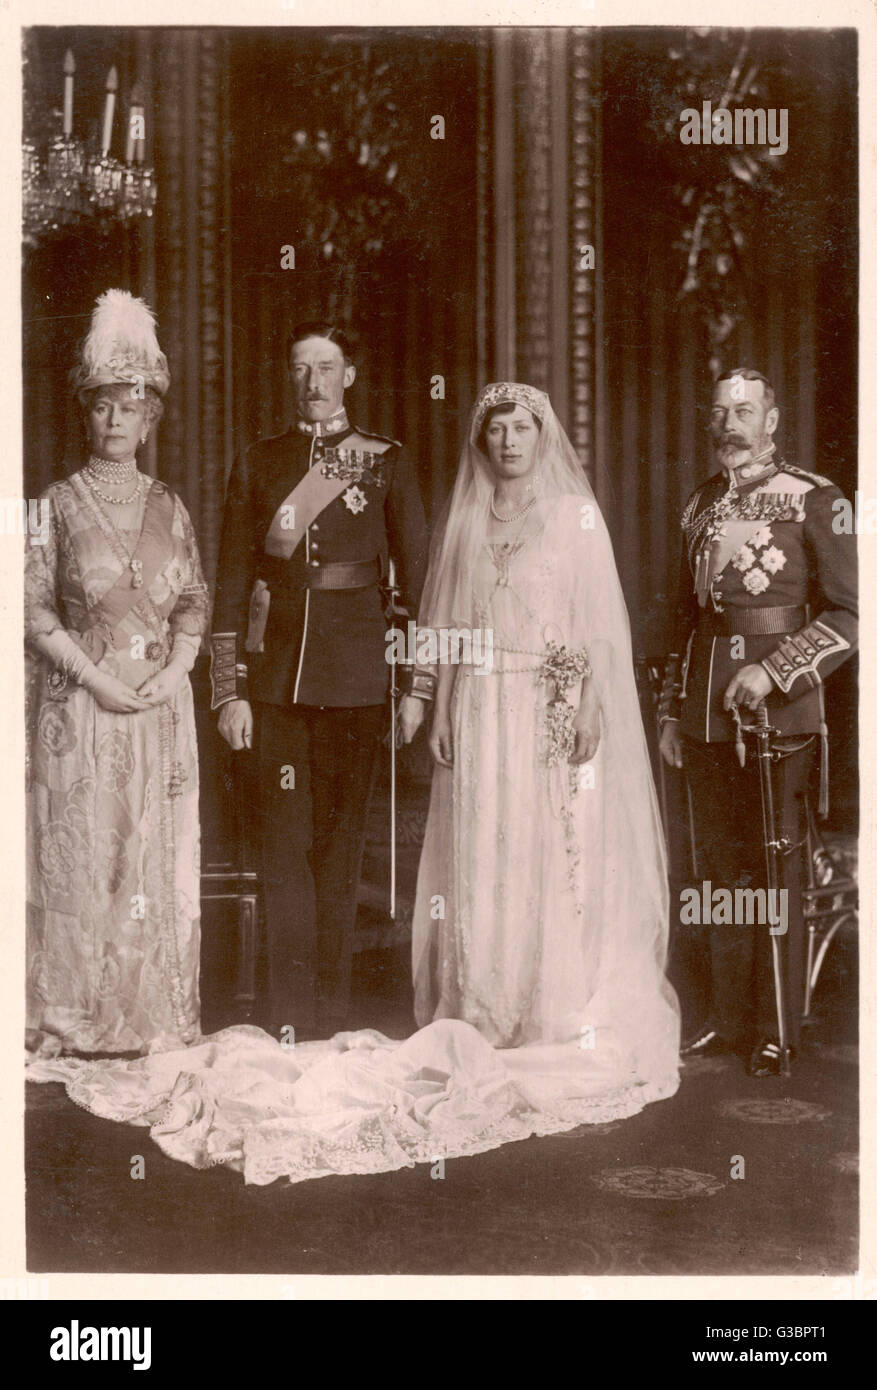 HENRY GEORGE CHARLES VISCOUNT LASCELLES  later 6th Earl of HAREWOOD at his marriage to Princess  Mary - posing with her  parents, George V and Mary     Date: 1882 - 1947 Stock Photo